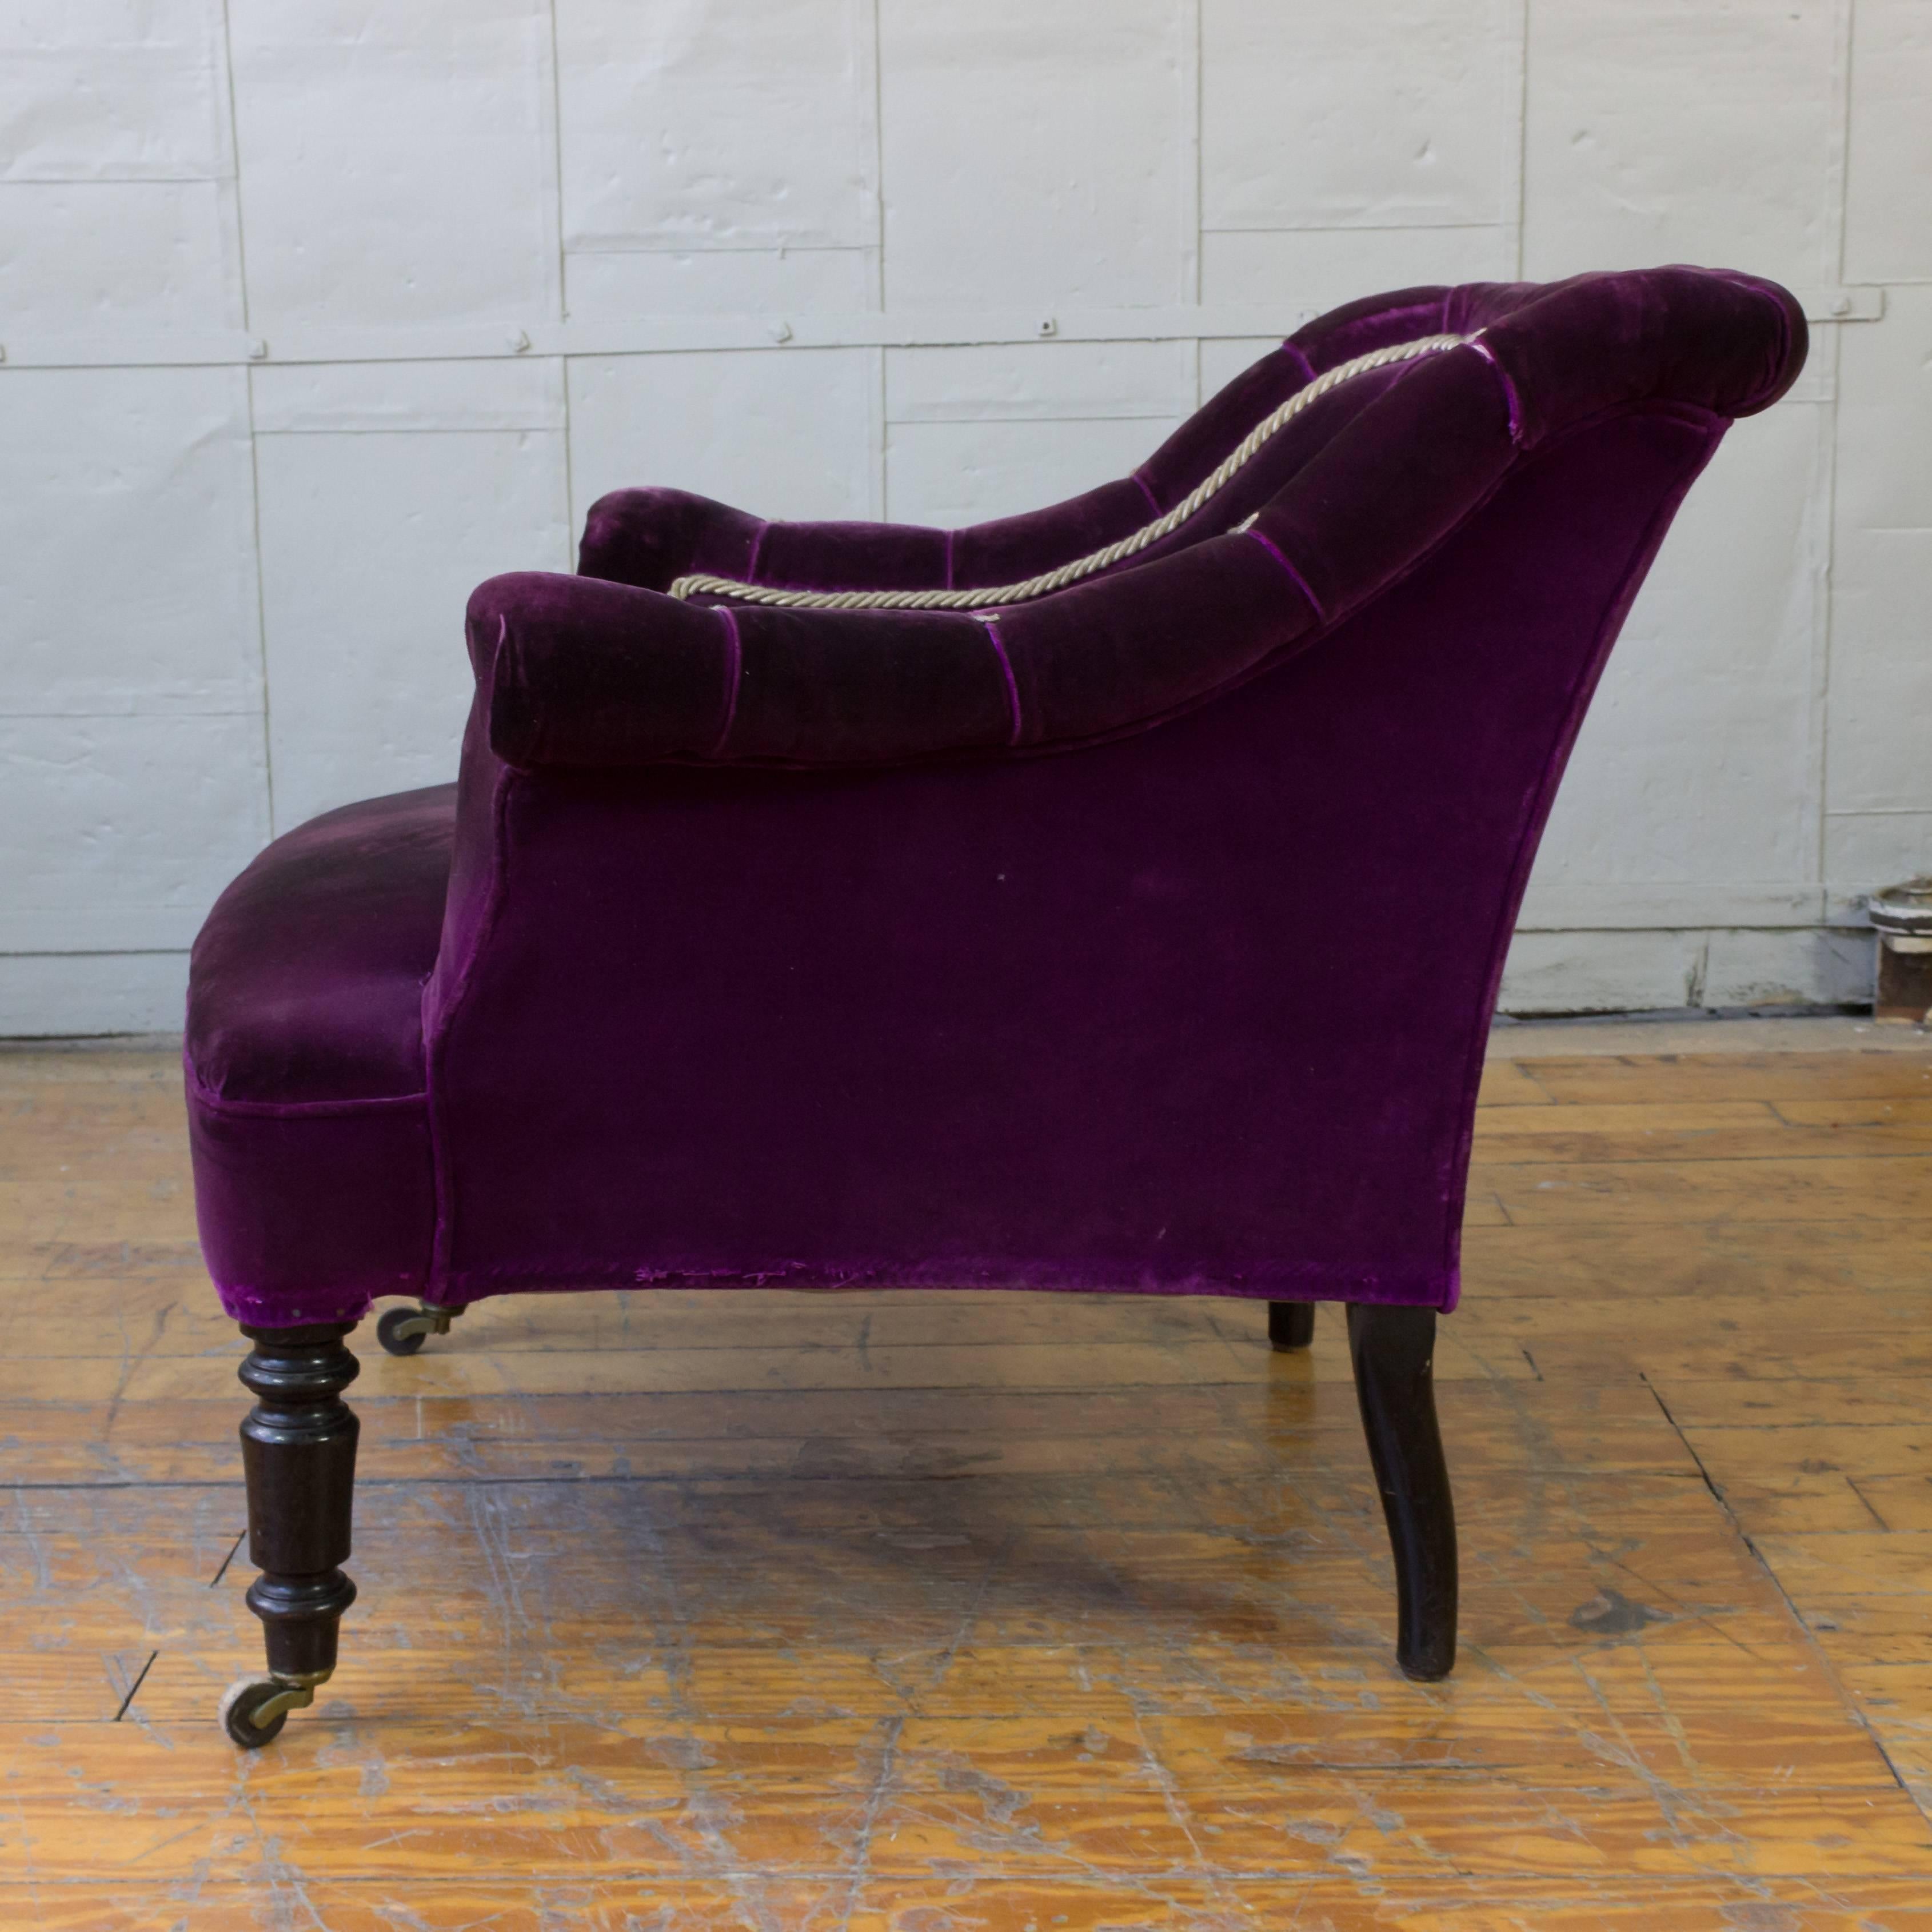 Napoleon III French 19th Century Armchair in Distressed Purple Velvet with White Braided Trim